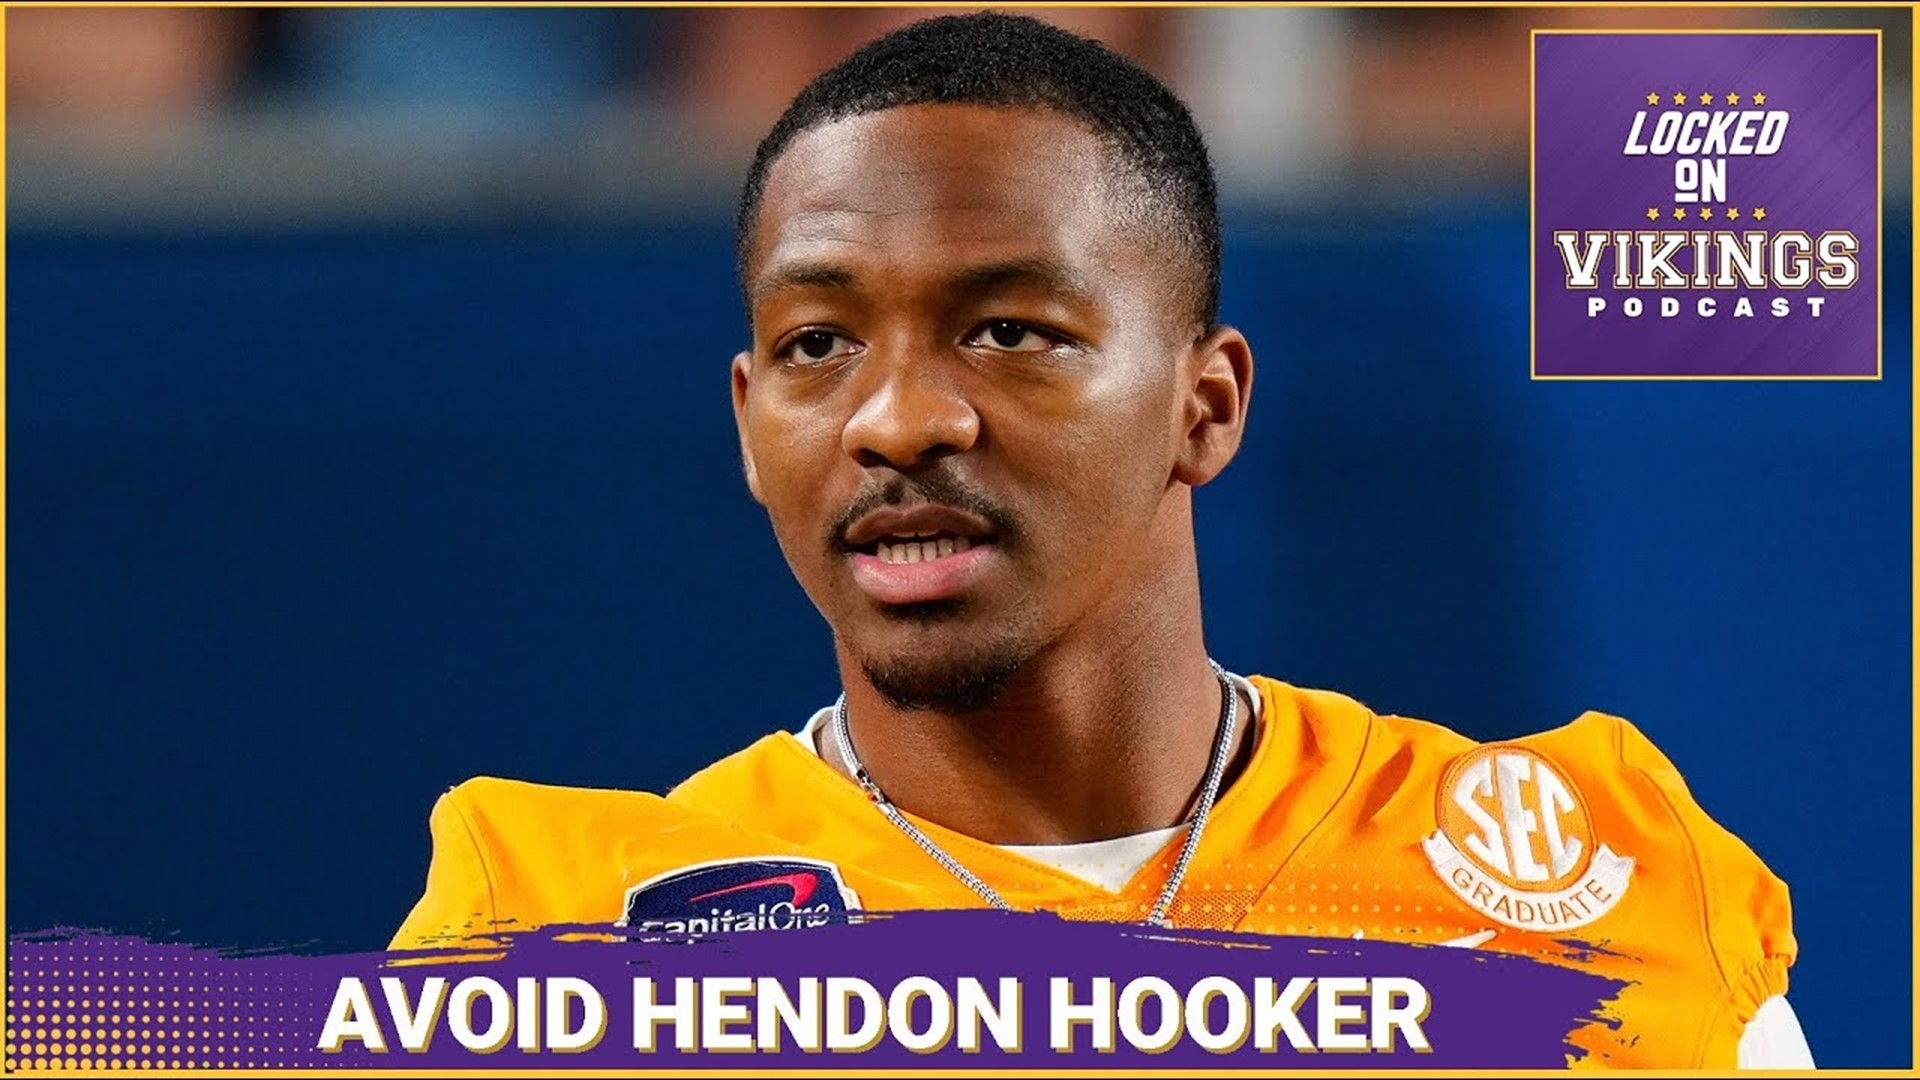 Tennessee Quarterback Hendon Hooker was the subject of debate in the Minnesota Vikings sphere. Would a Hendon Hooker selection in the first round be a good idea?